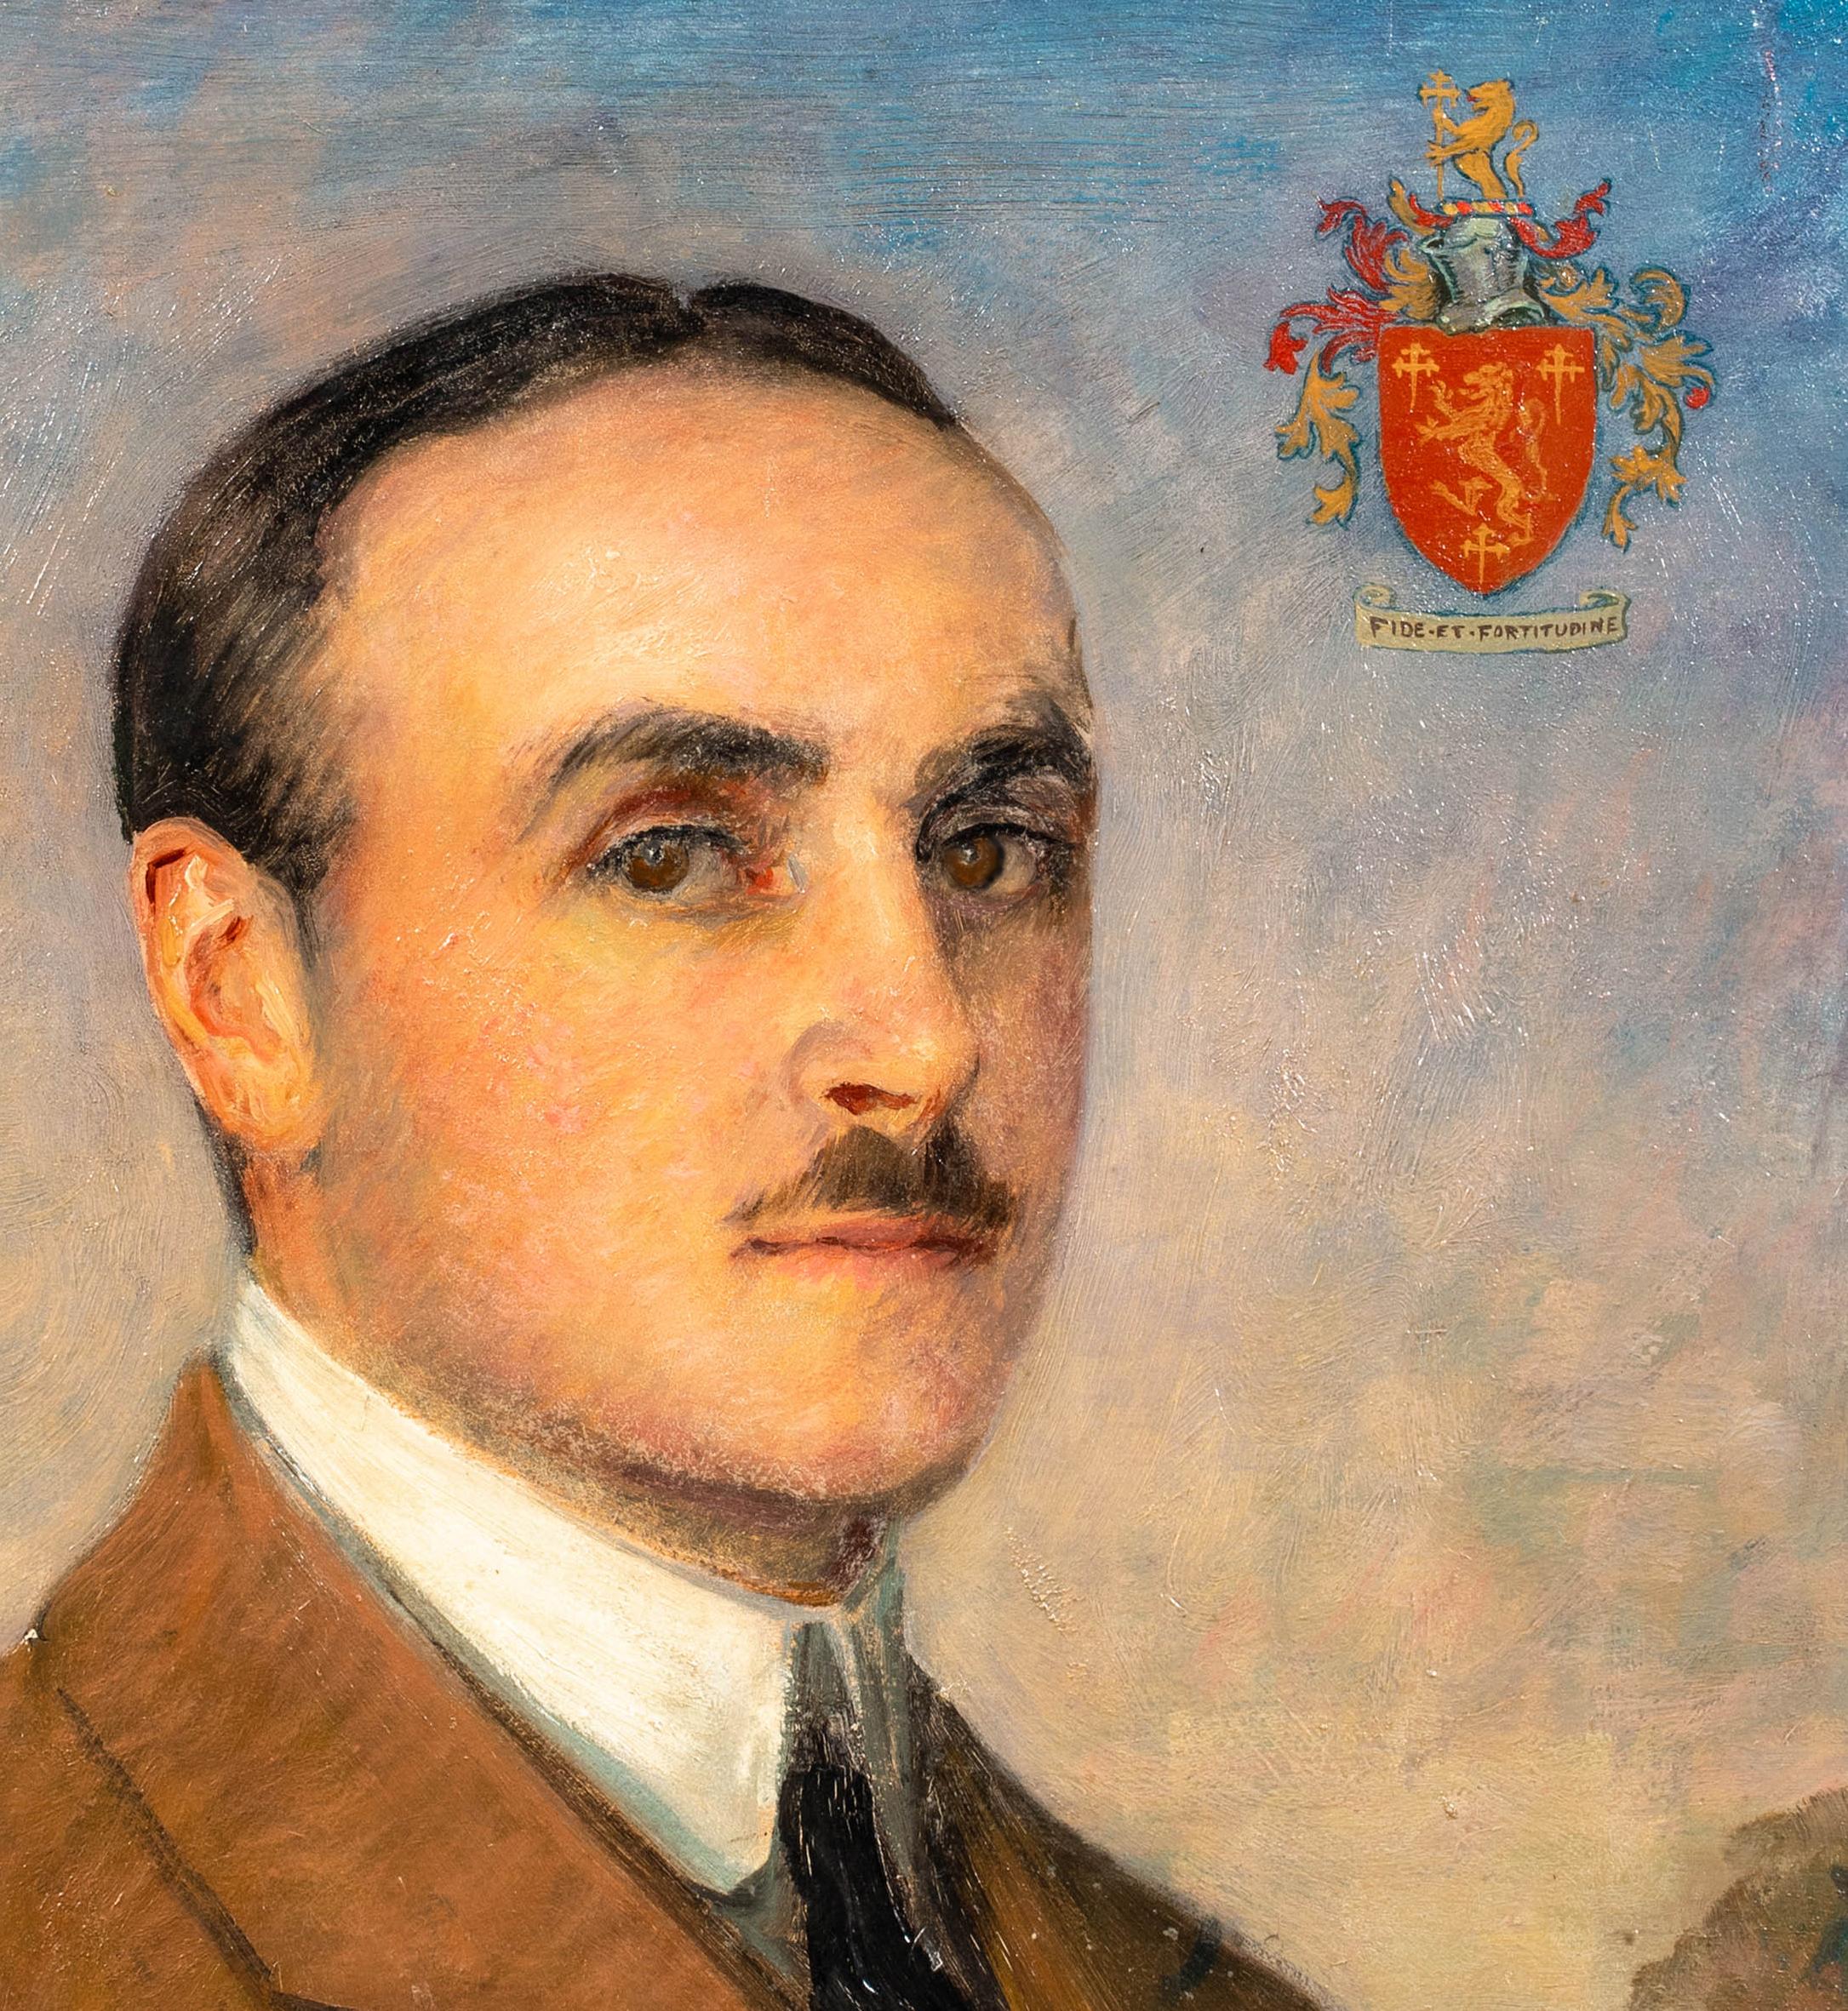 Portrait Of Captain Arthur George Coningsby Capell, dated 1915

by Charles A. Buchel (1872-1950) 

Large 1915 English portrait of Captain Arthur Capell with family coats of arms, oil on canvas by Charles Buchel. Excellent example of the artists work